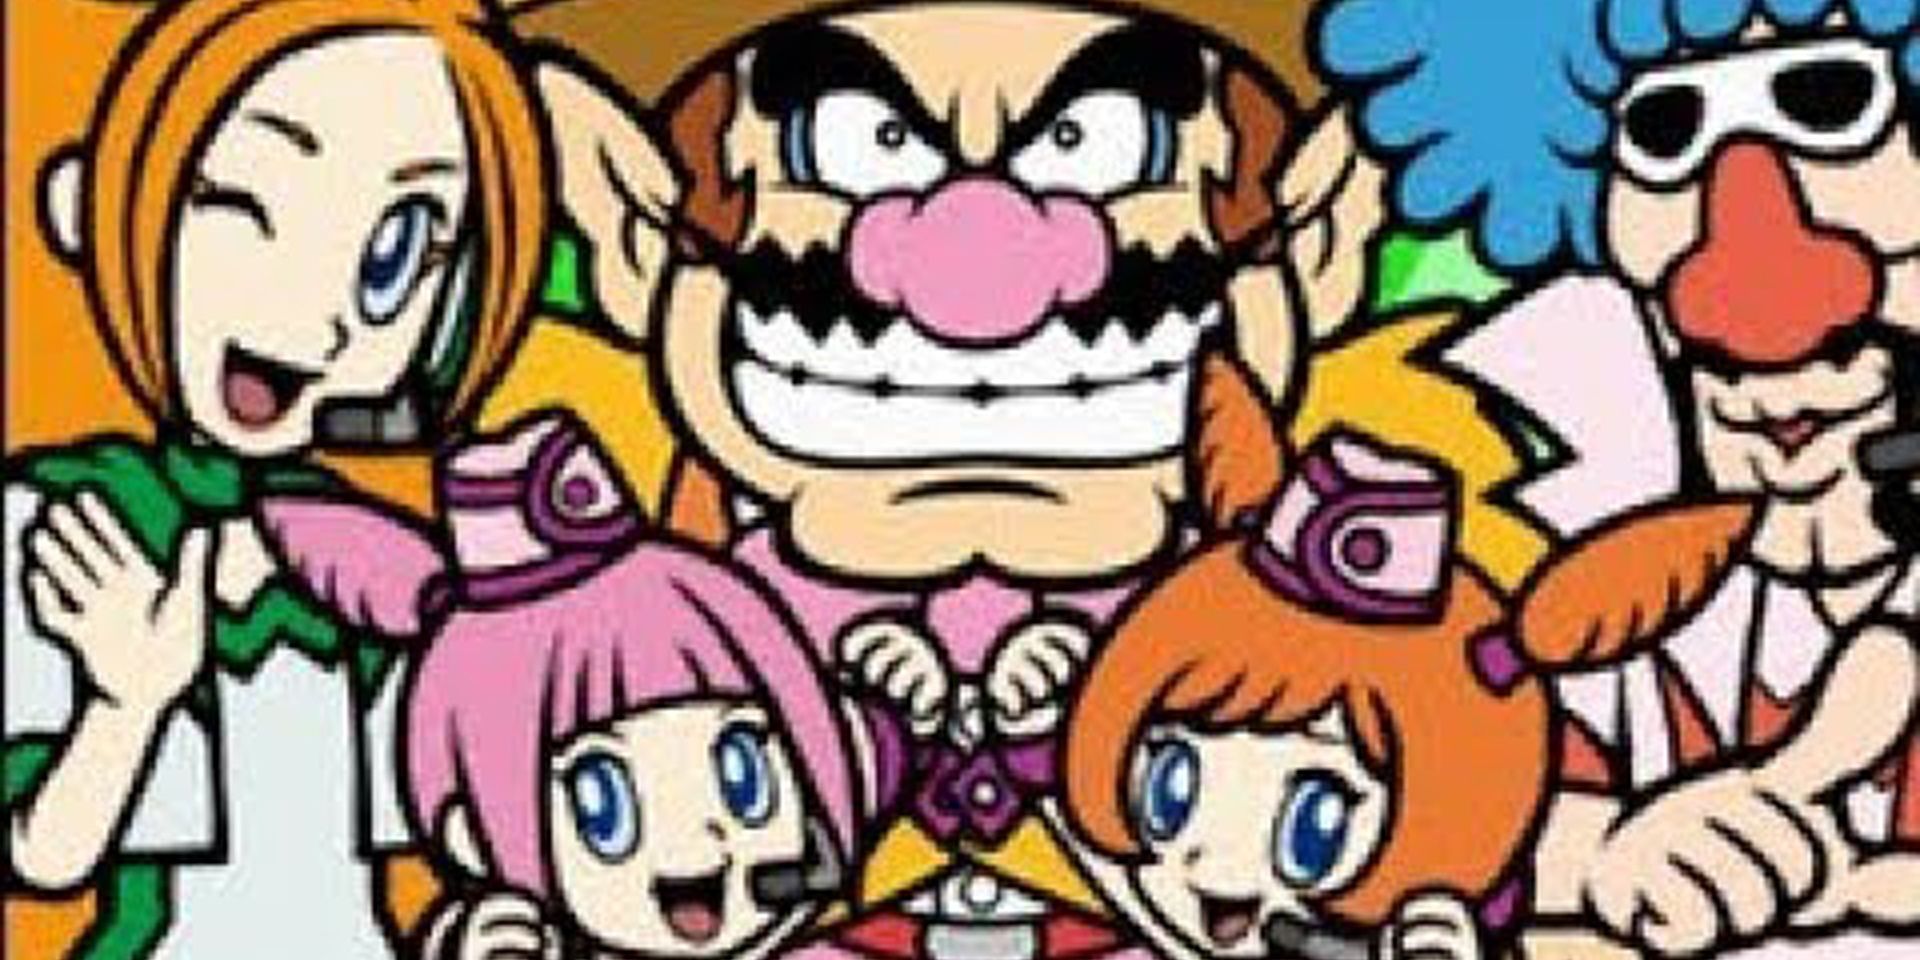 The cast of WarioWare: Snapped!  pose for a picture